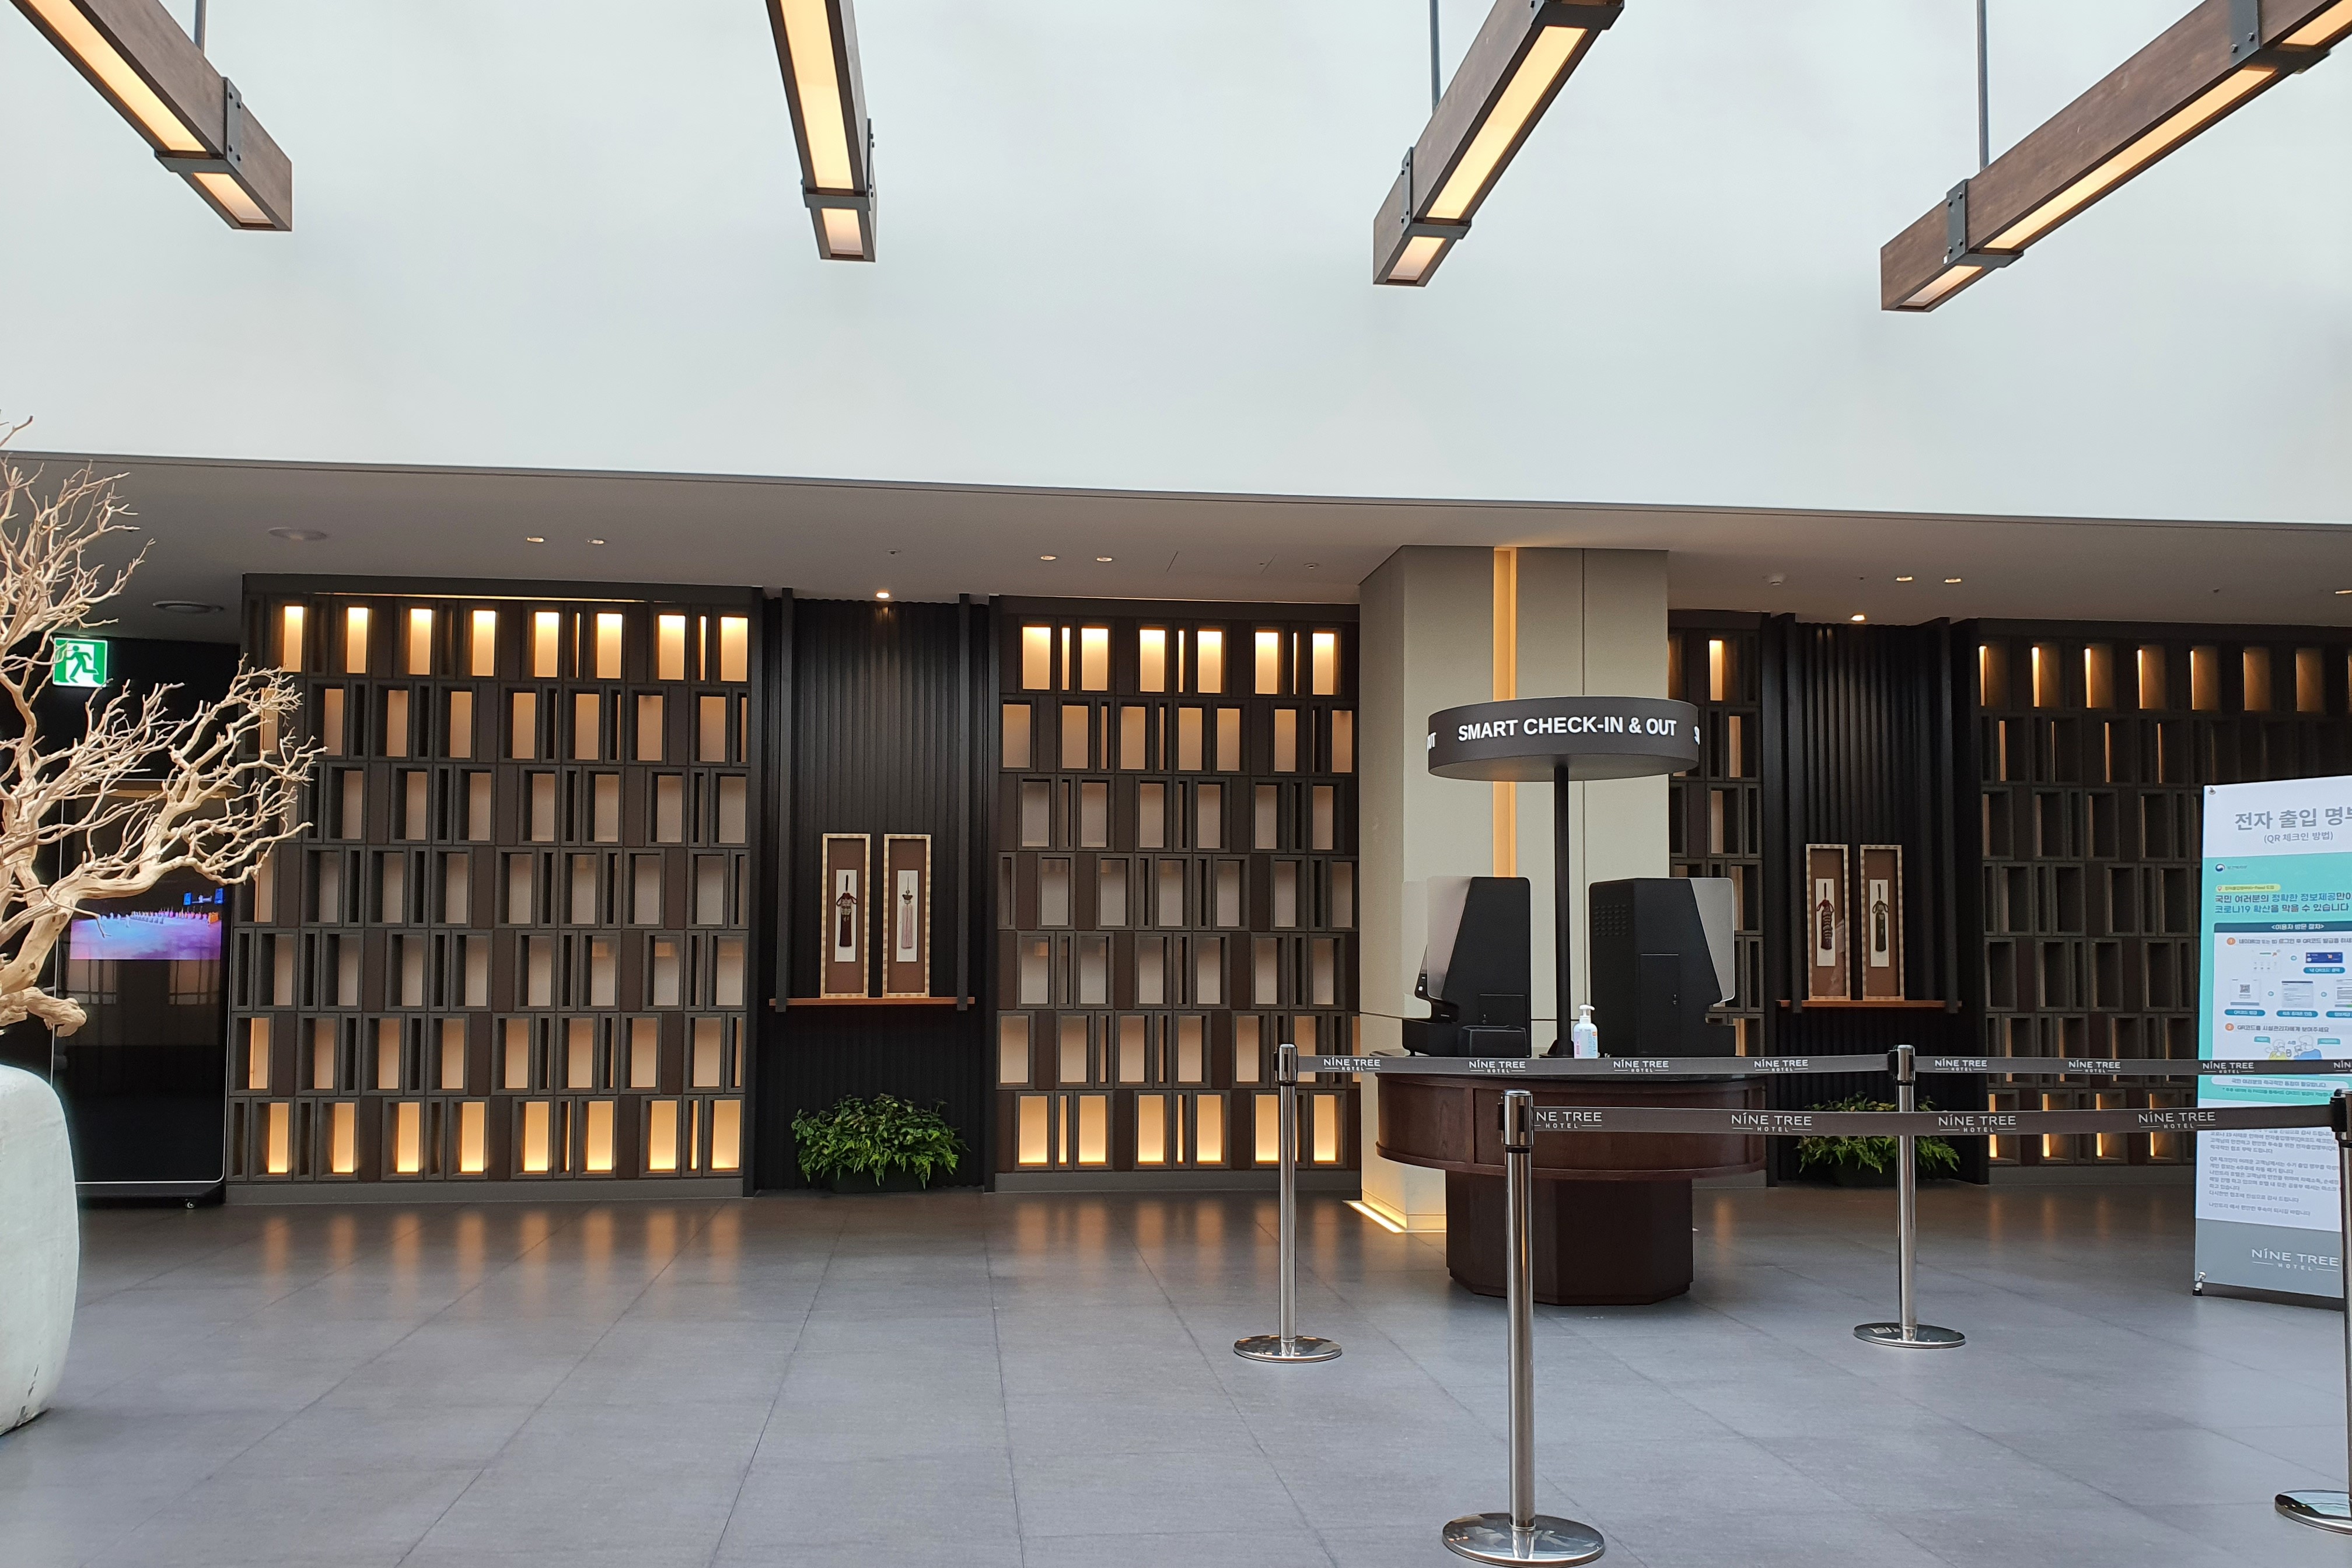 Nine Tree Premier Hotel Insadong1 : Lobby with a clean and modern interior